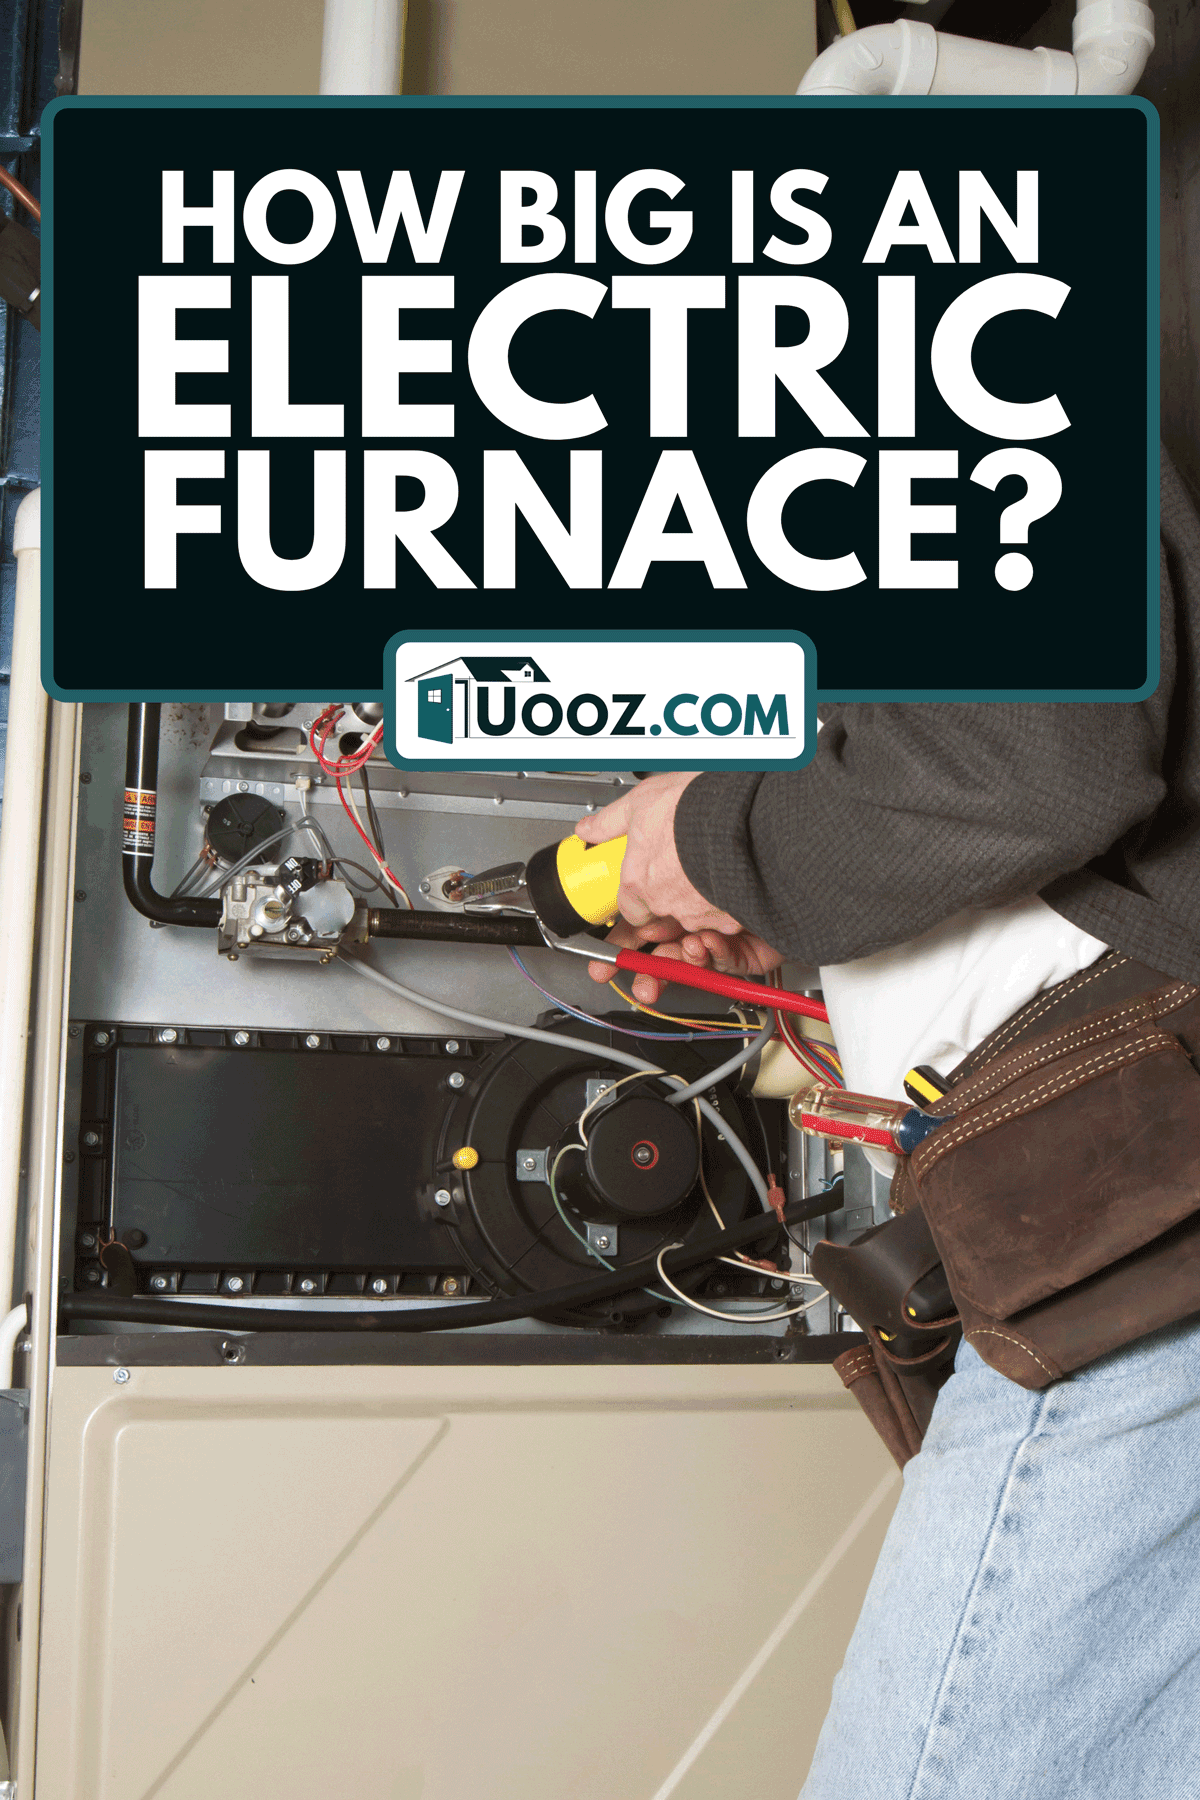 A worker troubleshooting furnace problems, How Big Is An Electric Furnace?